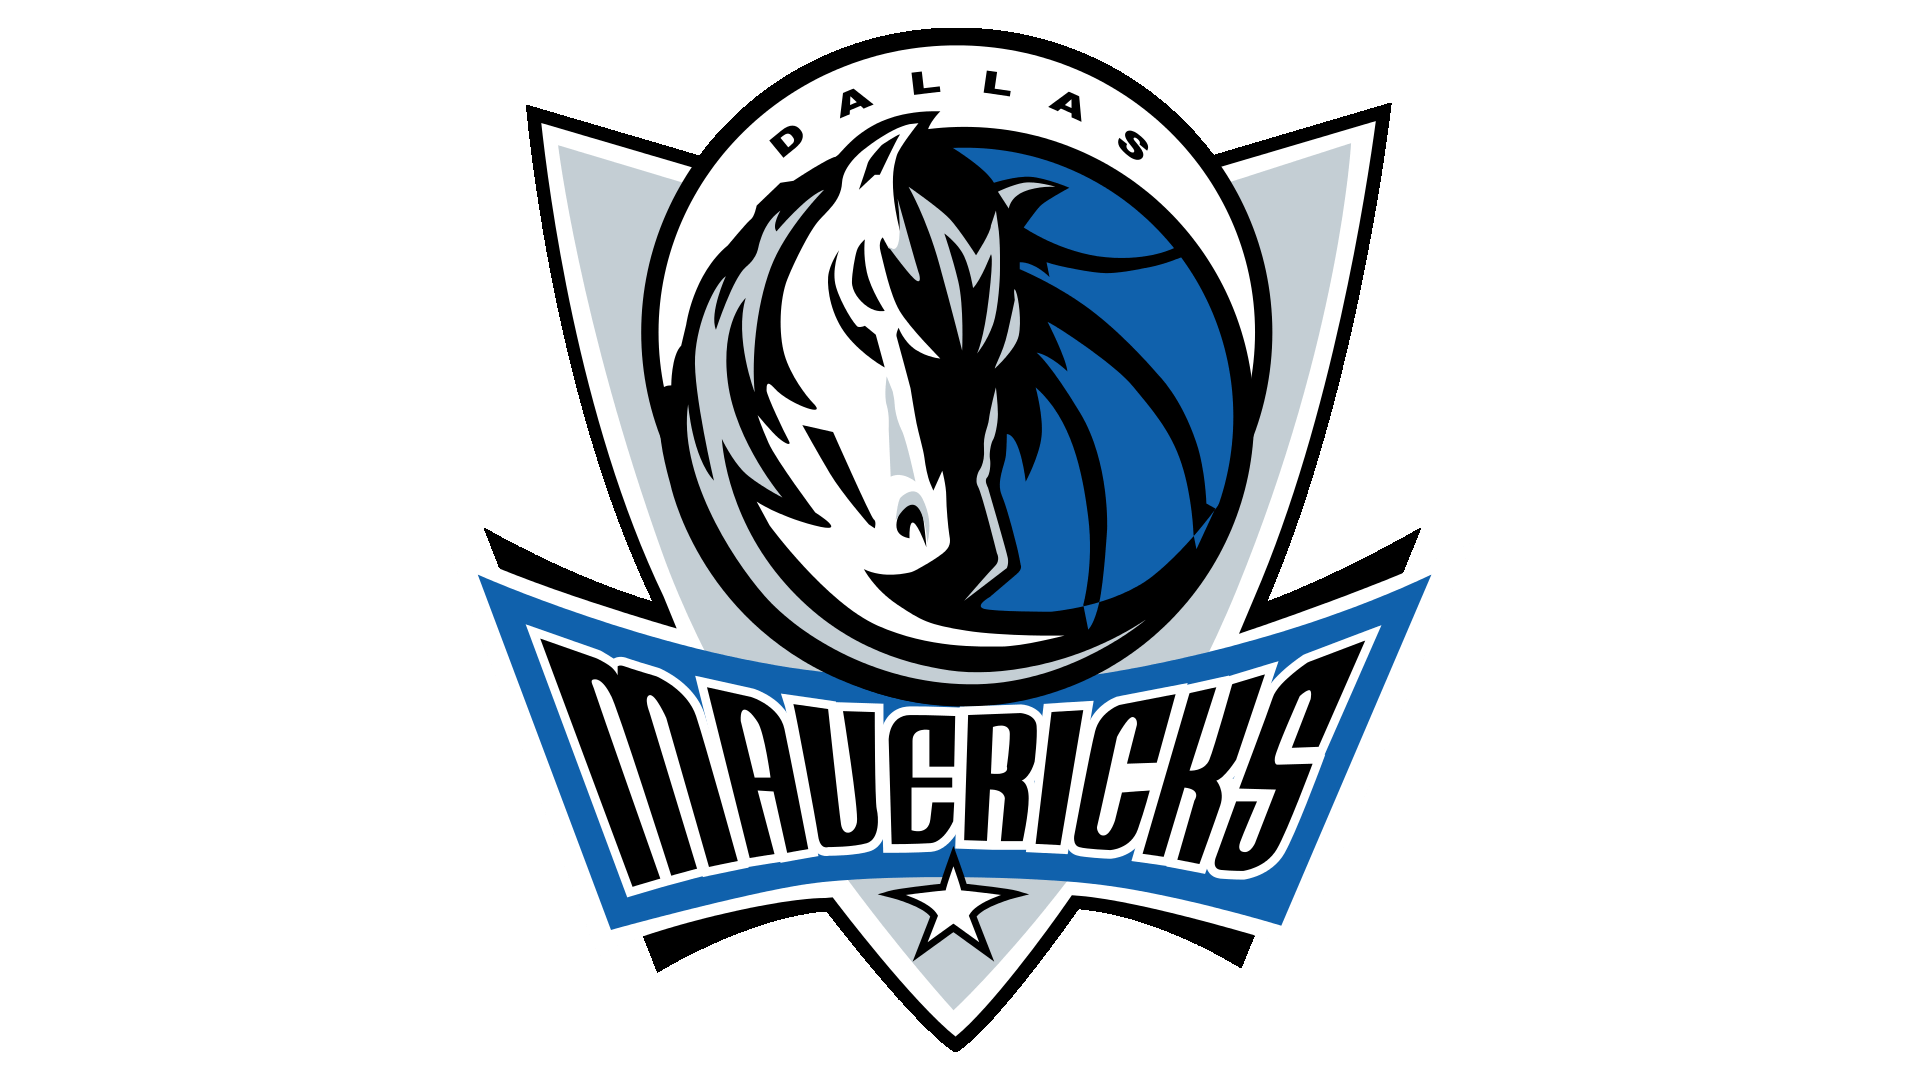 Mavericks Logo - Dallas Mavericks Logo, Dallas Mavericks Symbol, Meaning, History